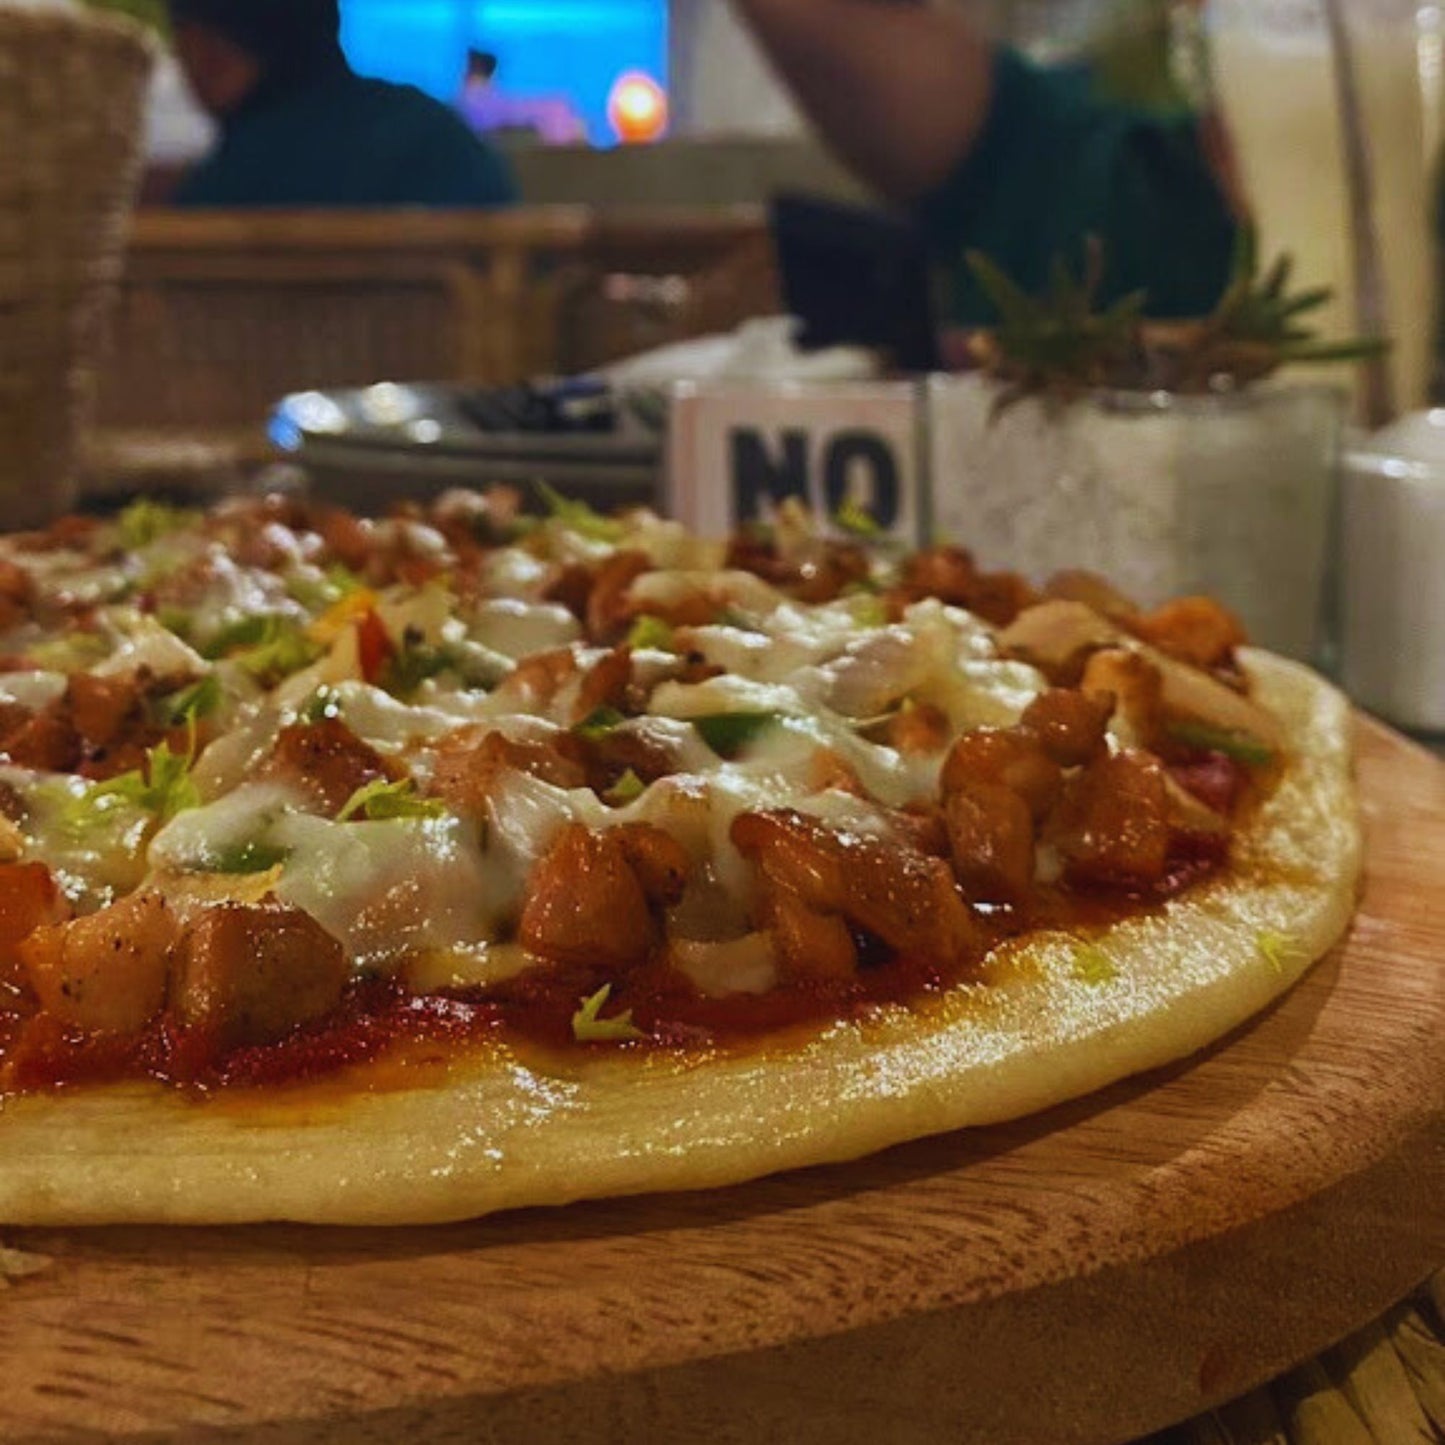 -50% for Pizza (10-inches) of your choice at Al fresco Garden cafe